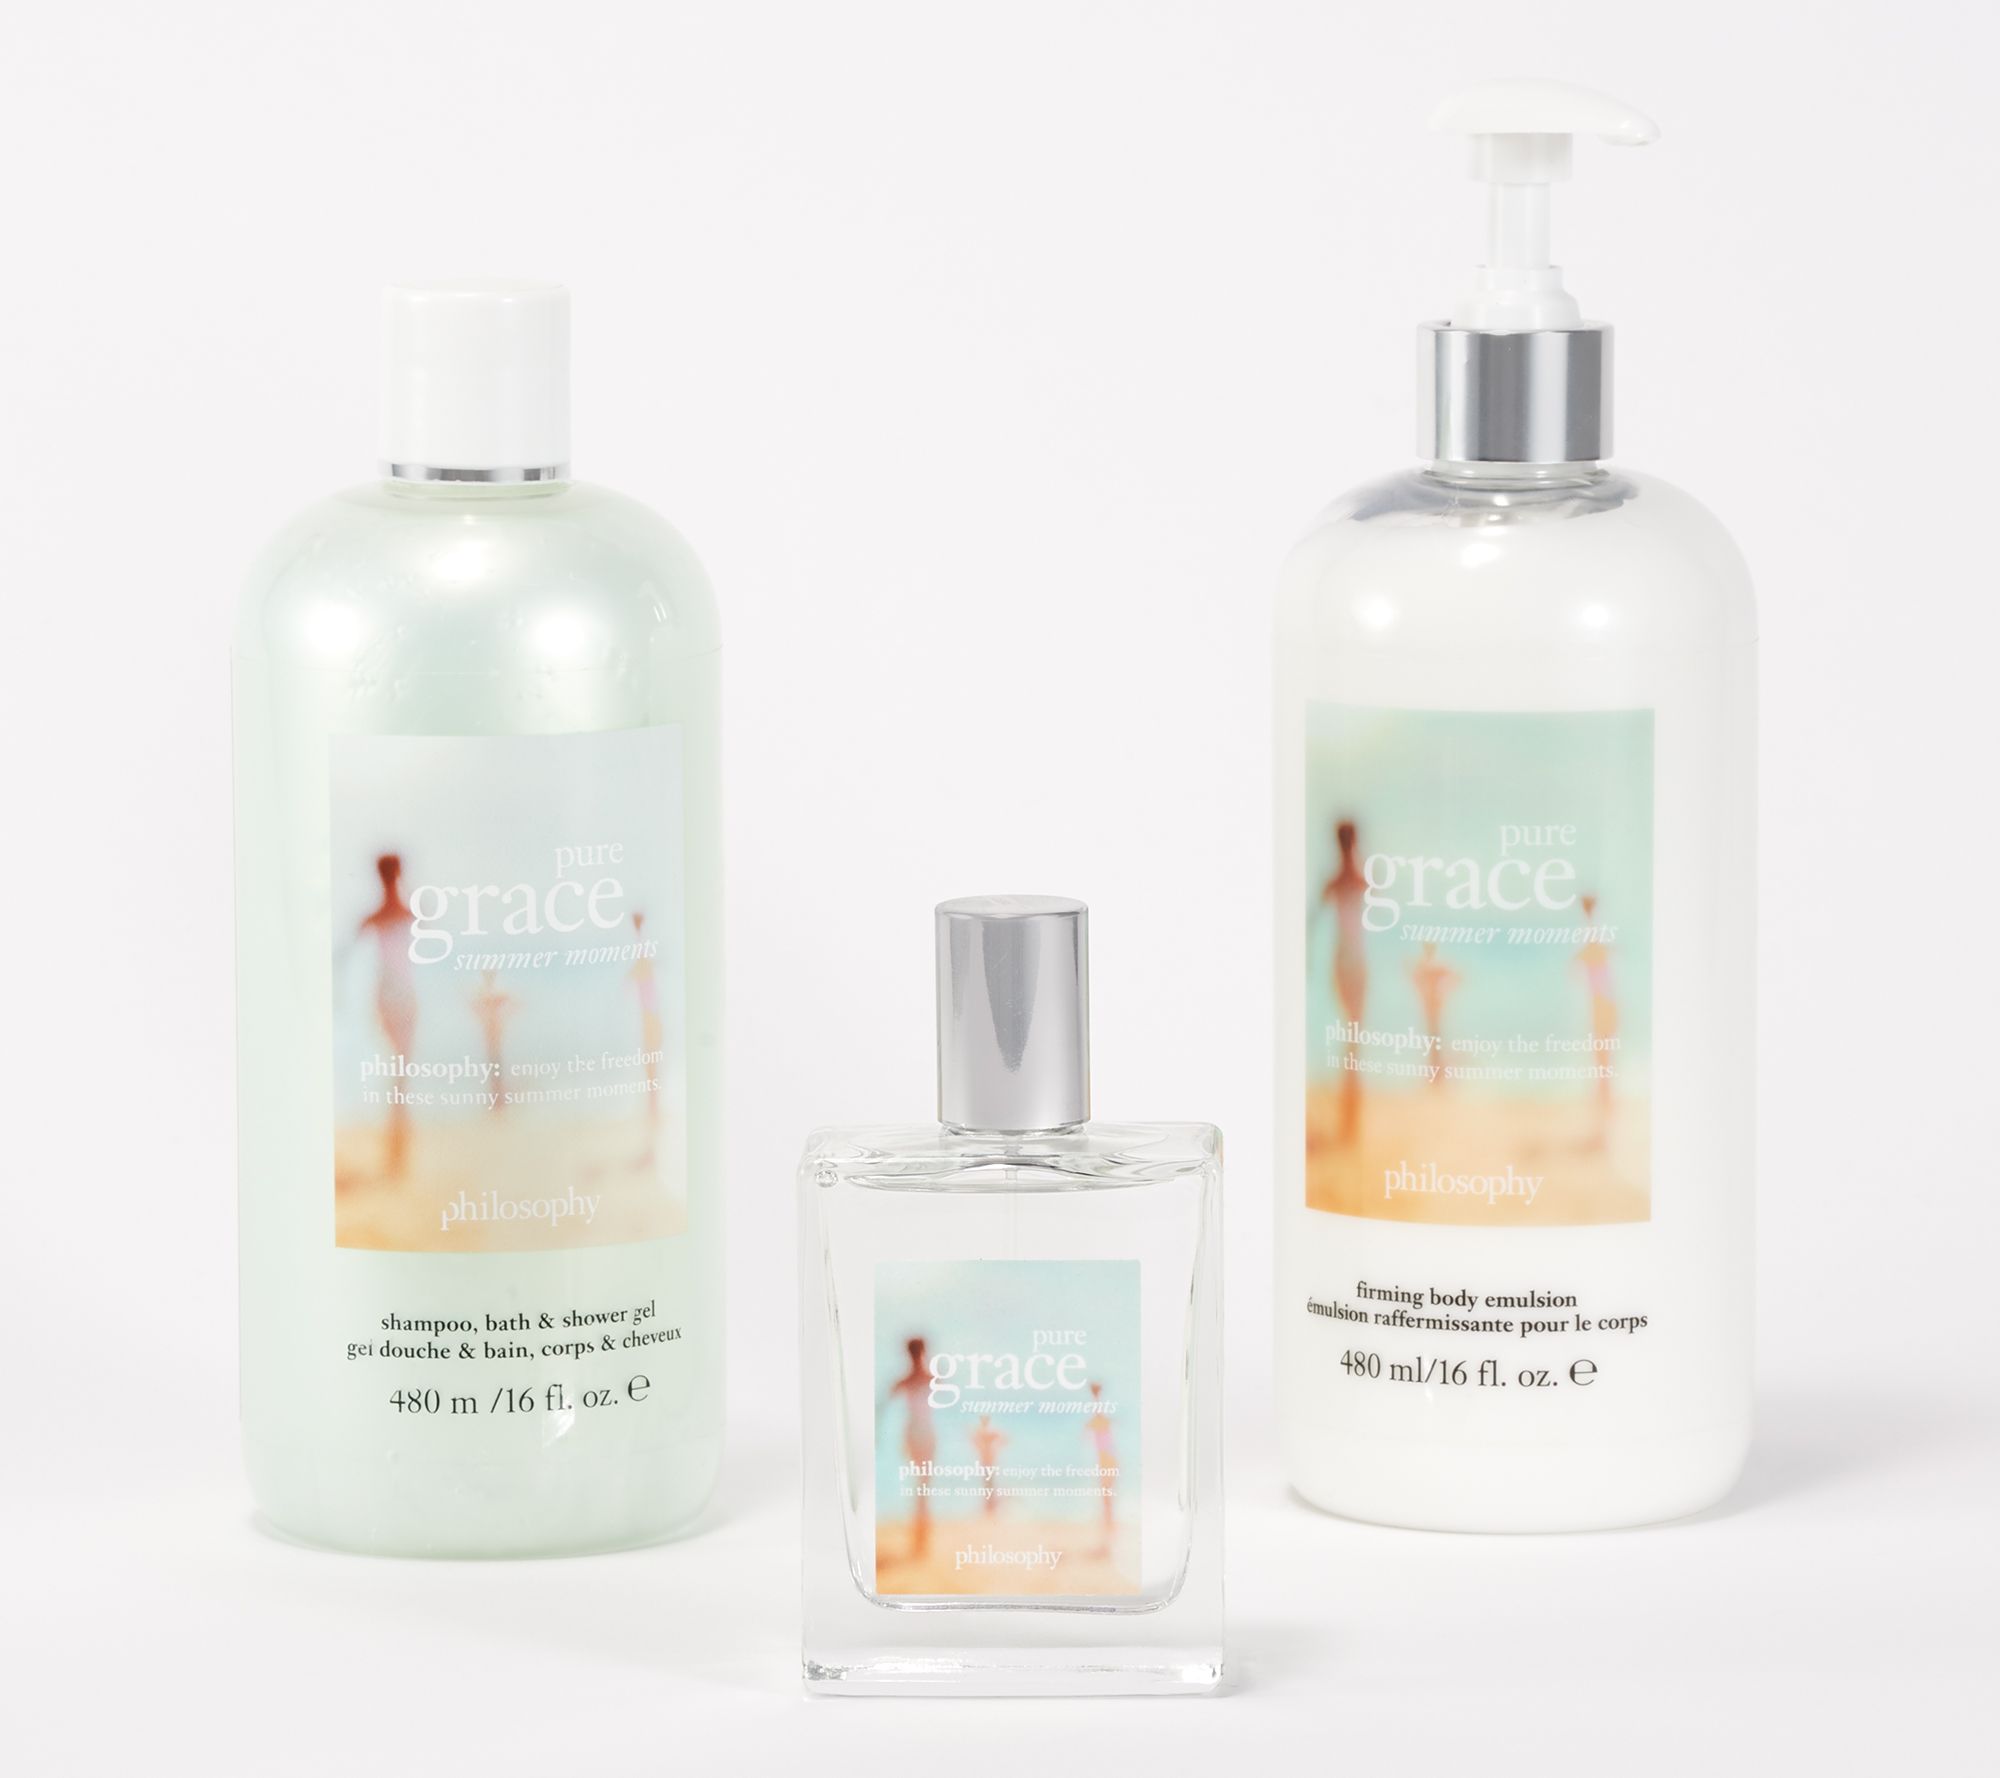 Pure Grace Endless Summer Philosophy perfume - a fragrance for